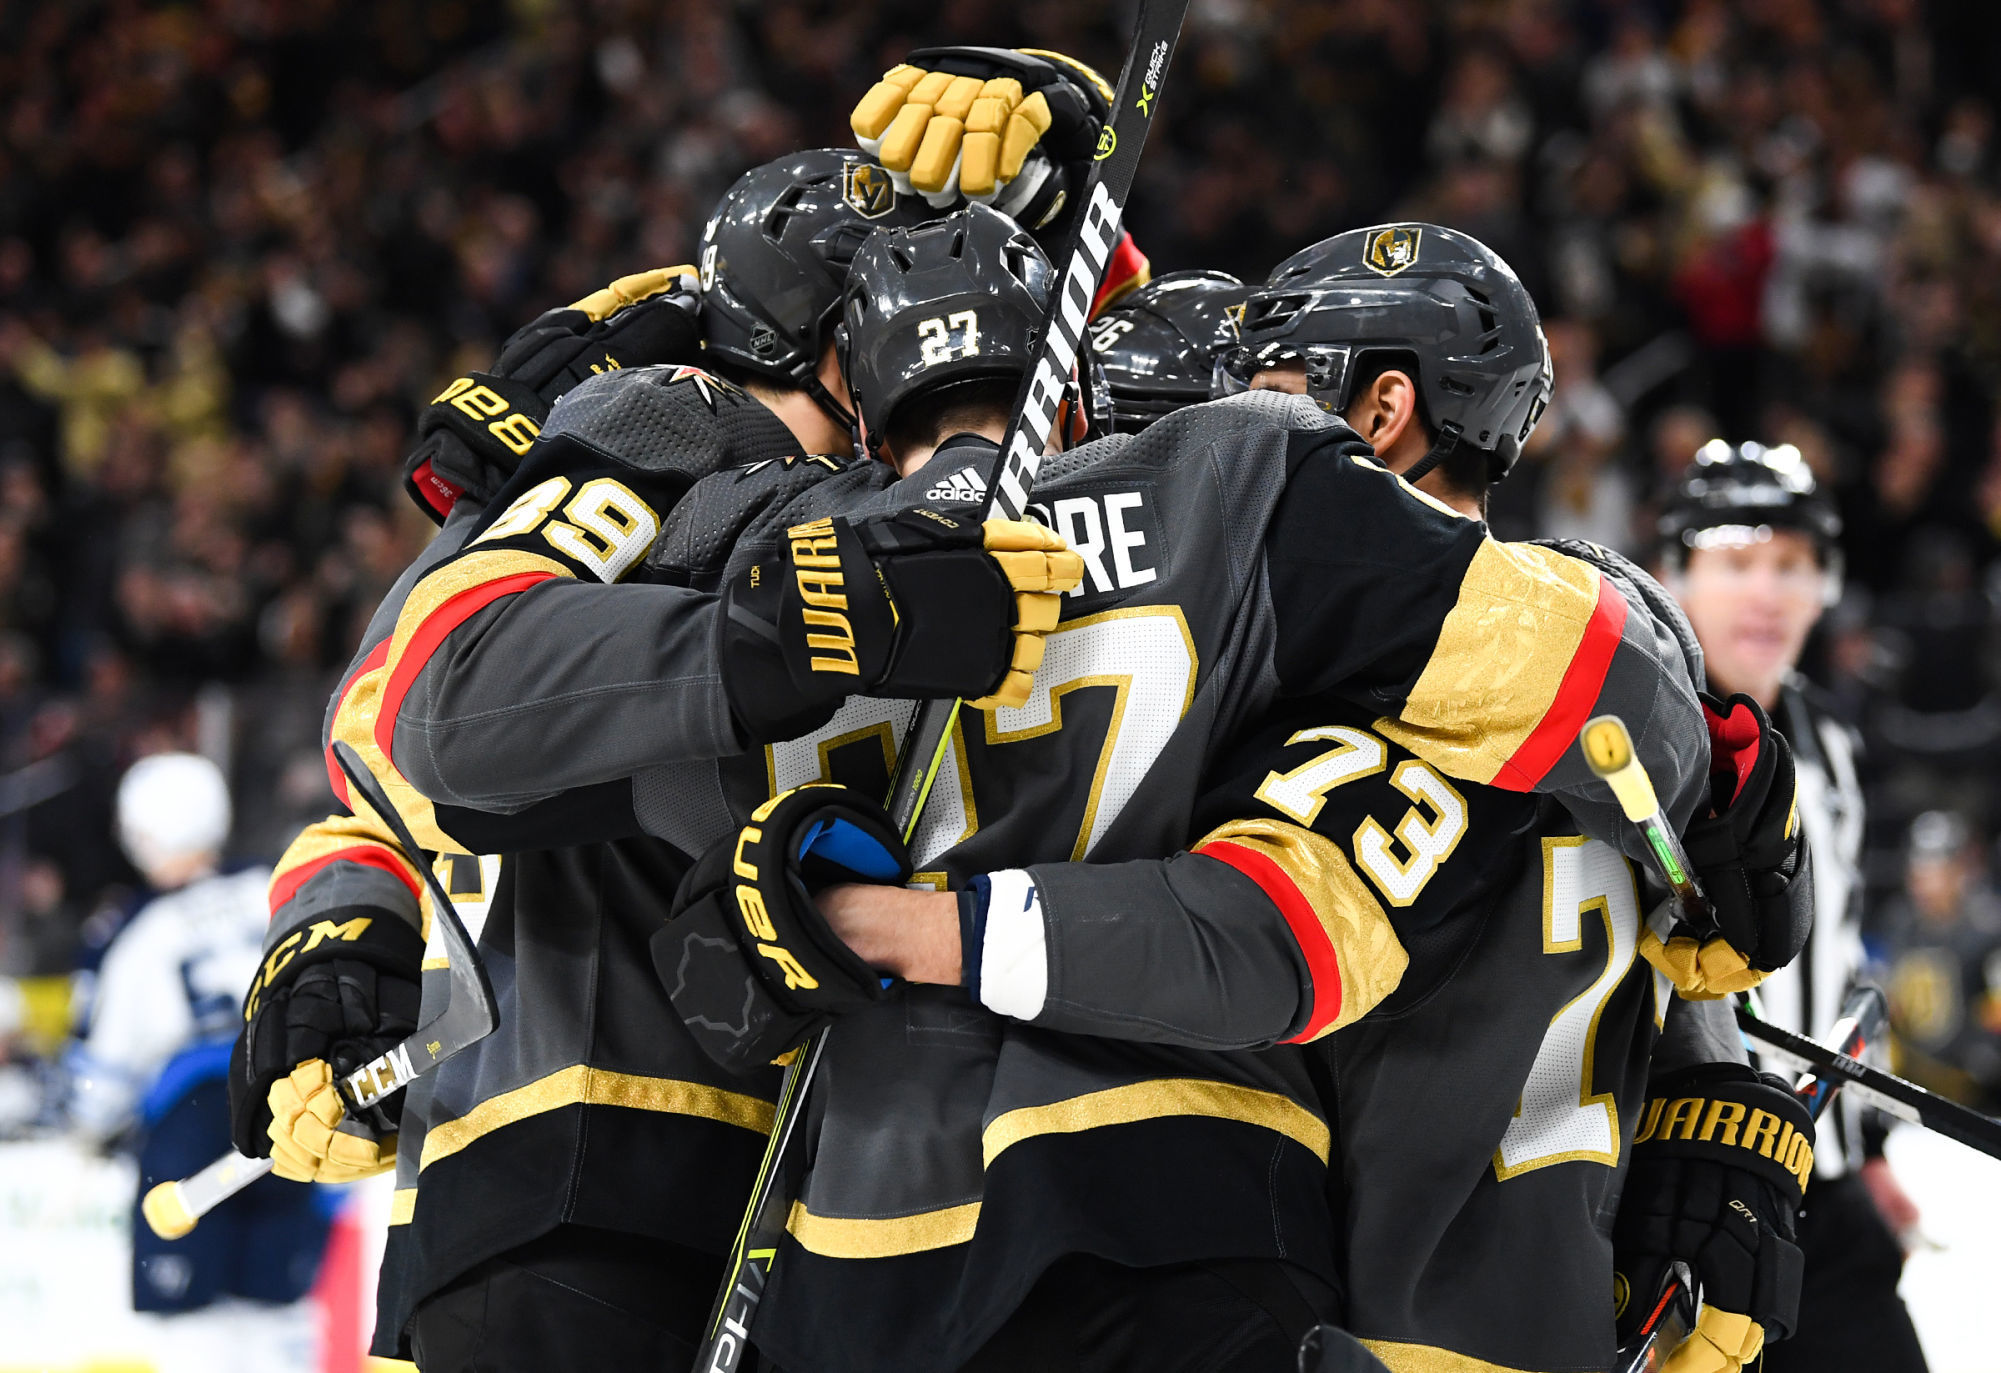 Feb 22, 2019; Las Vegas, NV, USA; Vegas Golden Knights defenseman Shea Theodore (27) celebrates with teammates after scoring a goal during the second period against the Winnipeg Jets at T-Mobile Arena. Photo : SUSA / Icon Sport